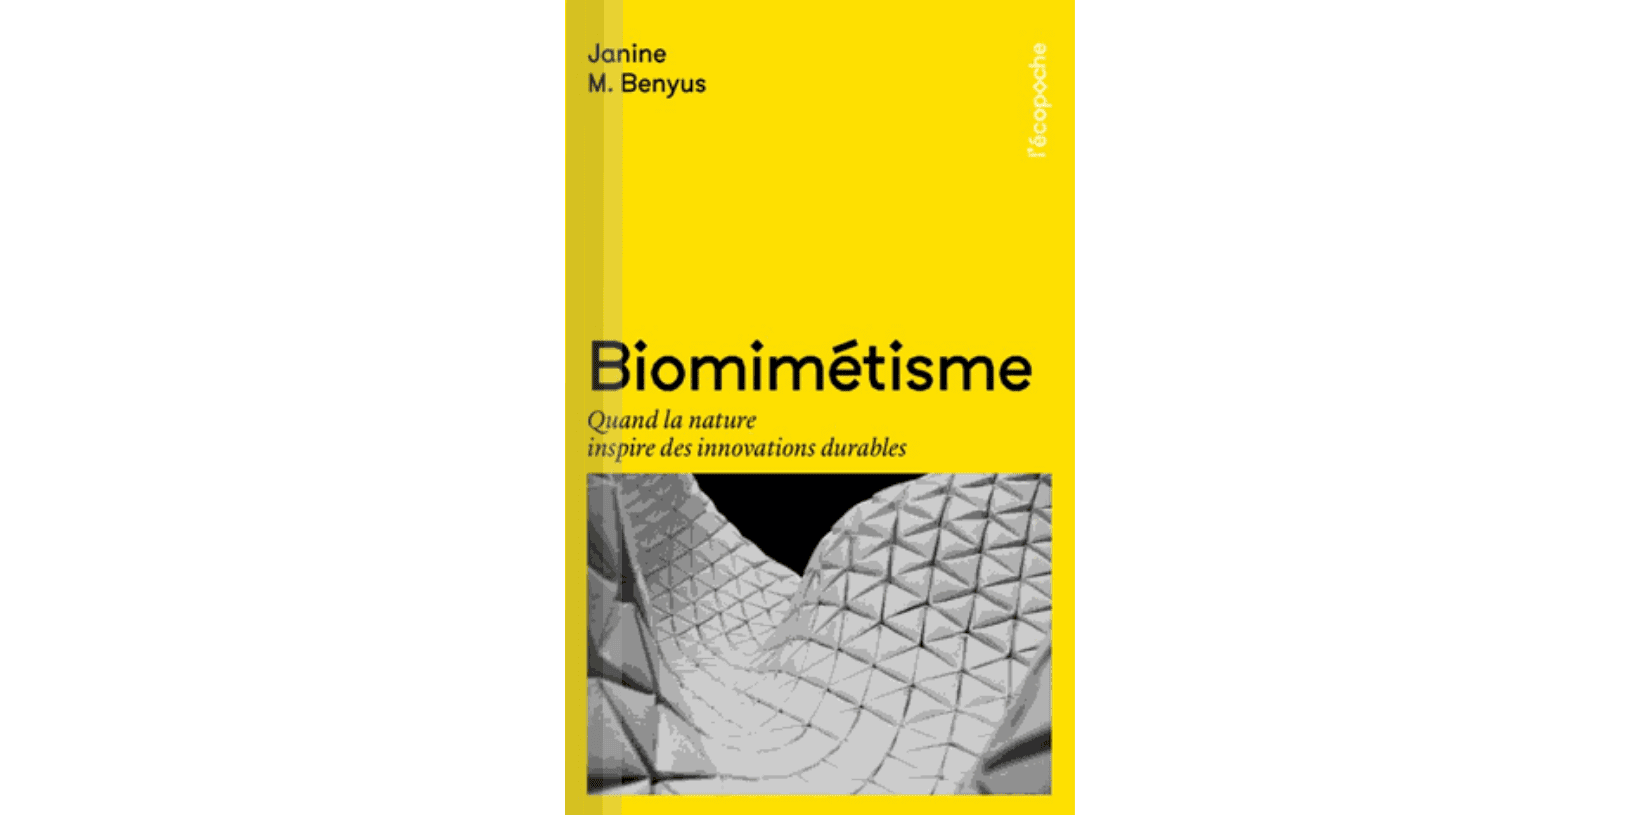 biomimicry, biomimetisme, permaculture, innovation, nature